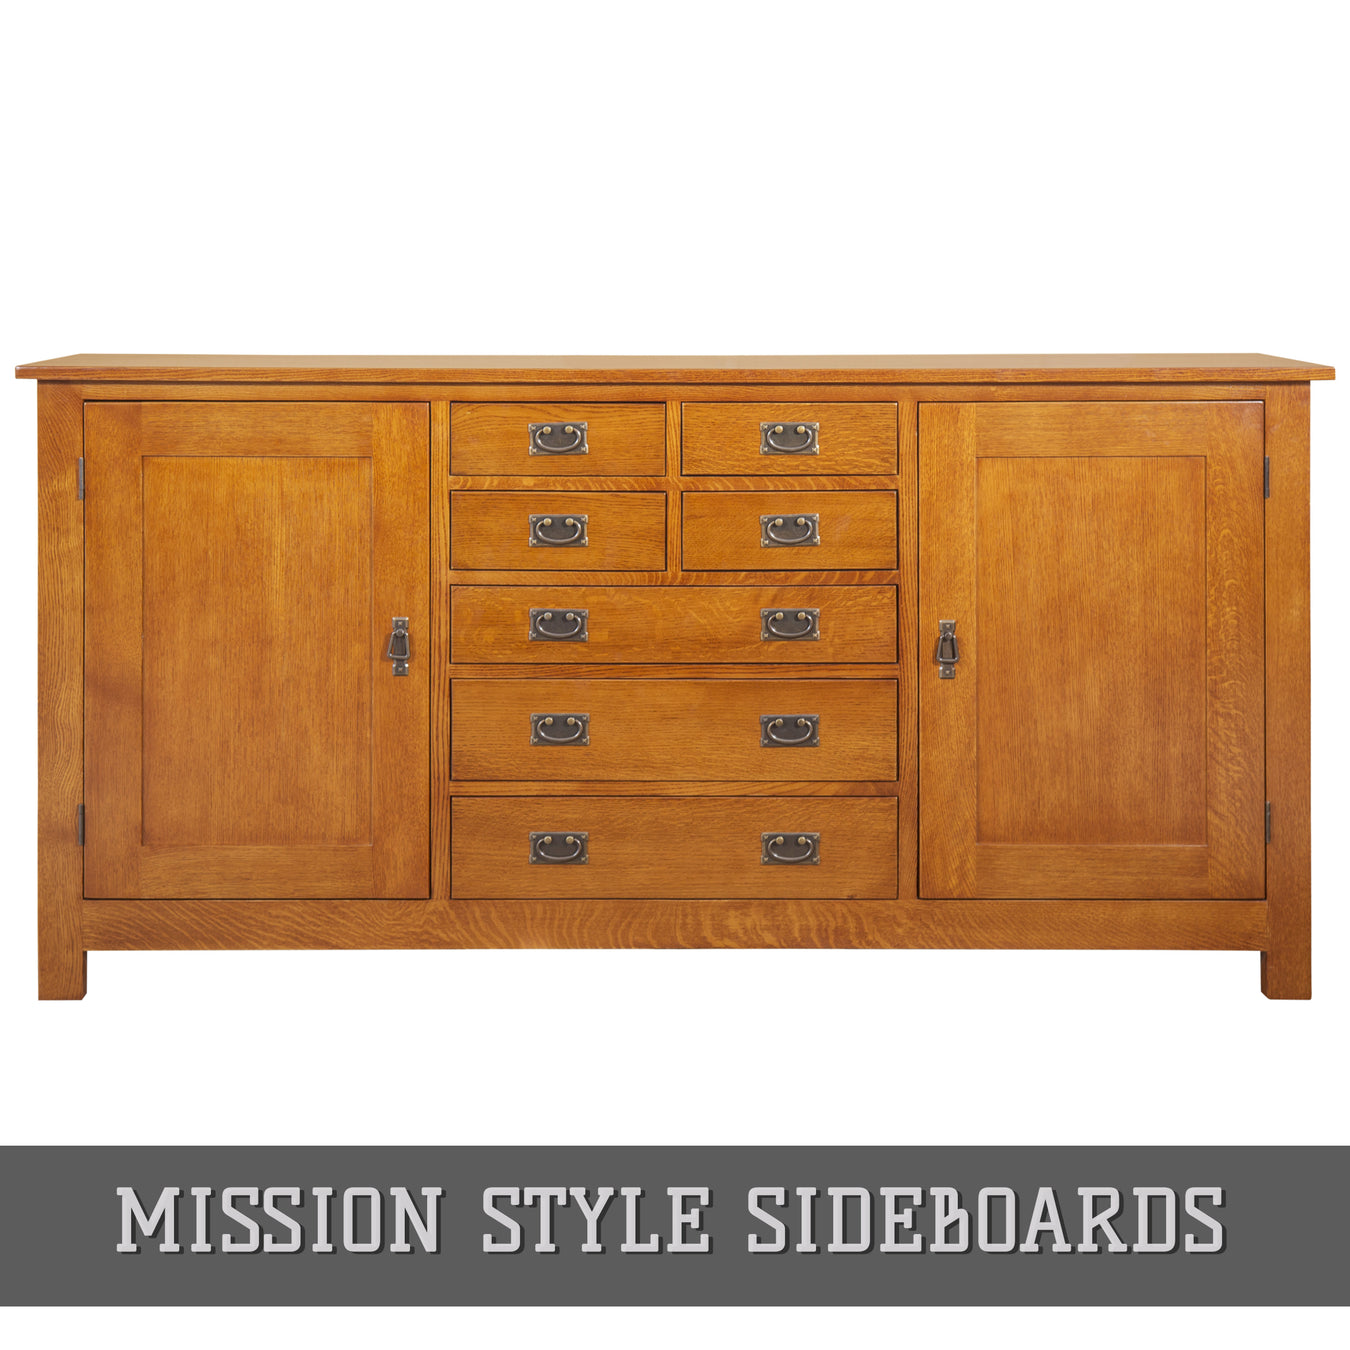 Mission Style Sideboards